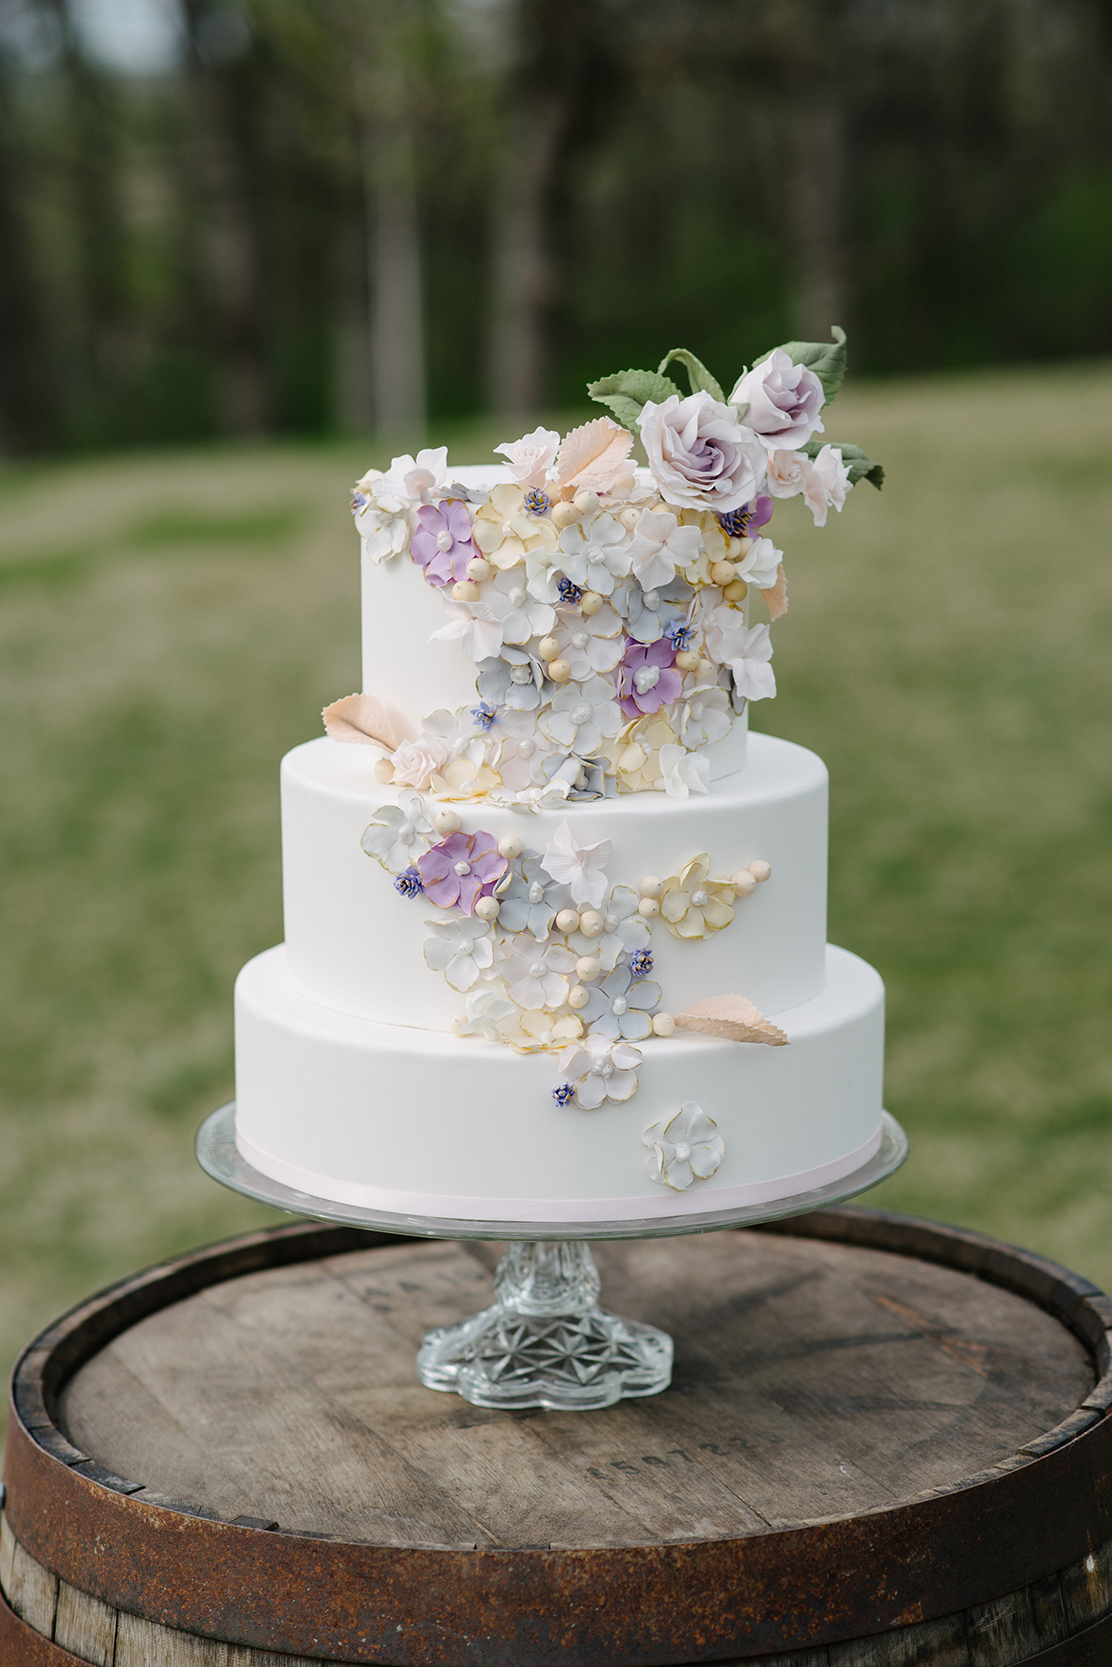 6 BEAUTIFULLY CURATED CAKES FROM WISCONSIN WEDDING BAKERIES�